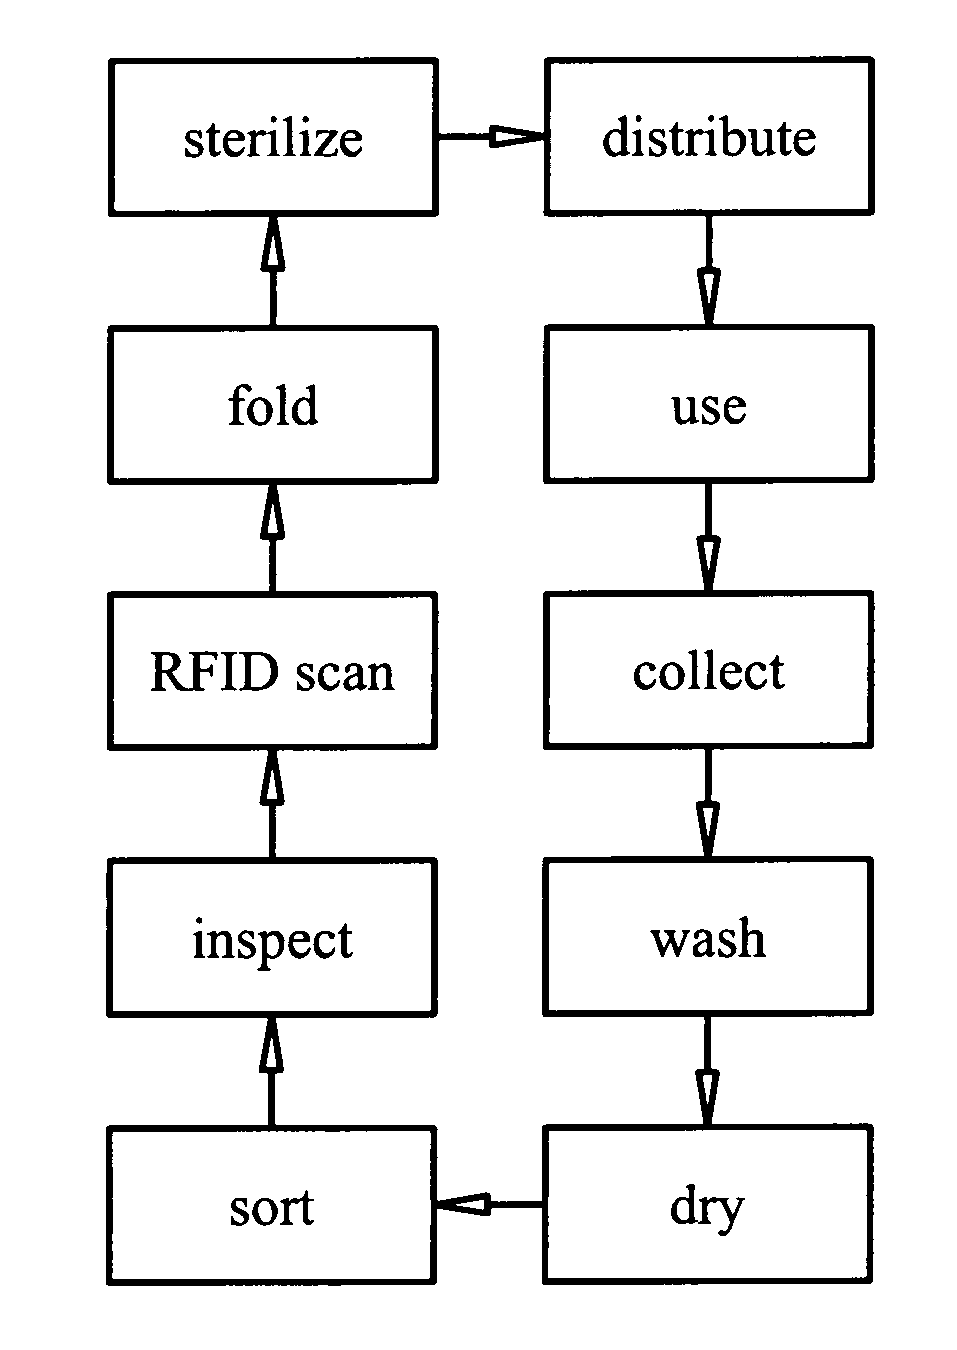 Management and distribution of surgical supplies within an RFID enabled network